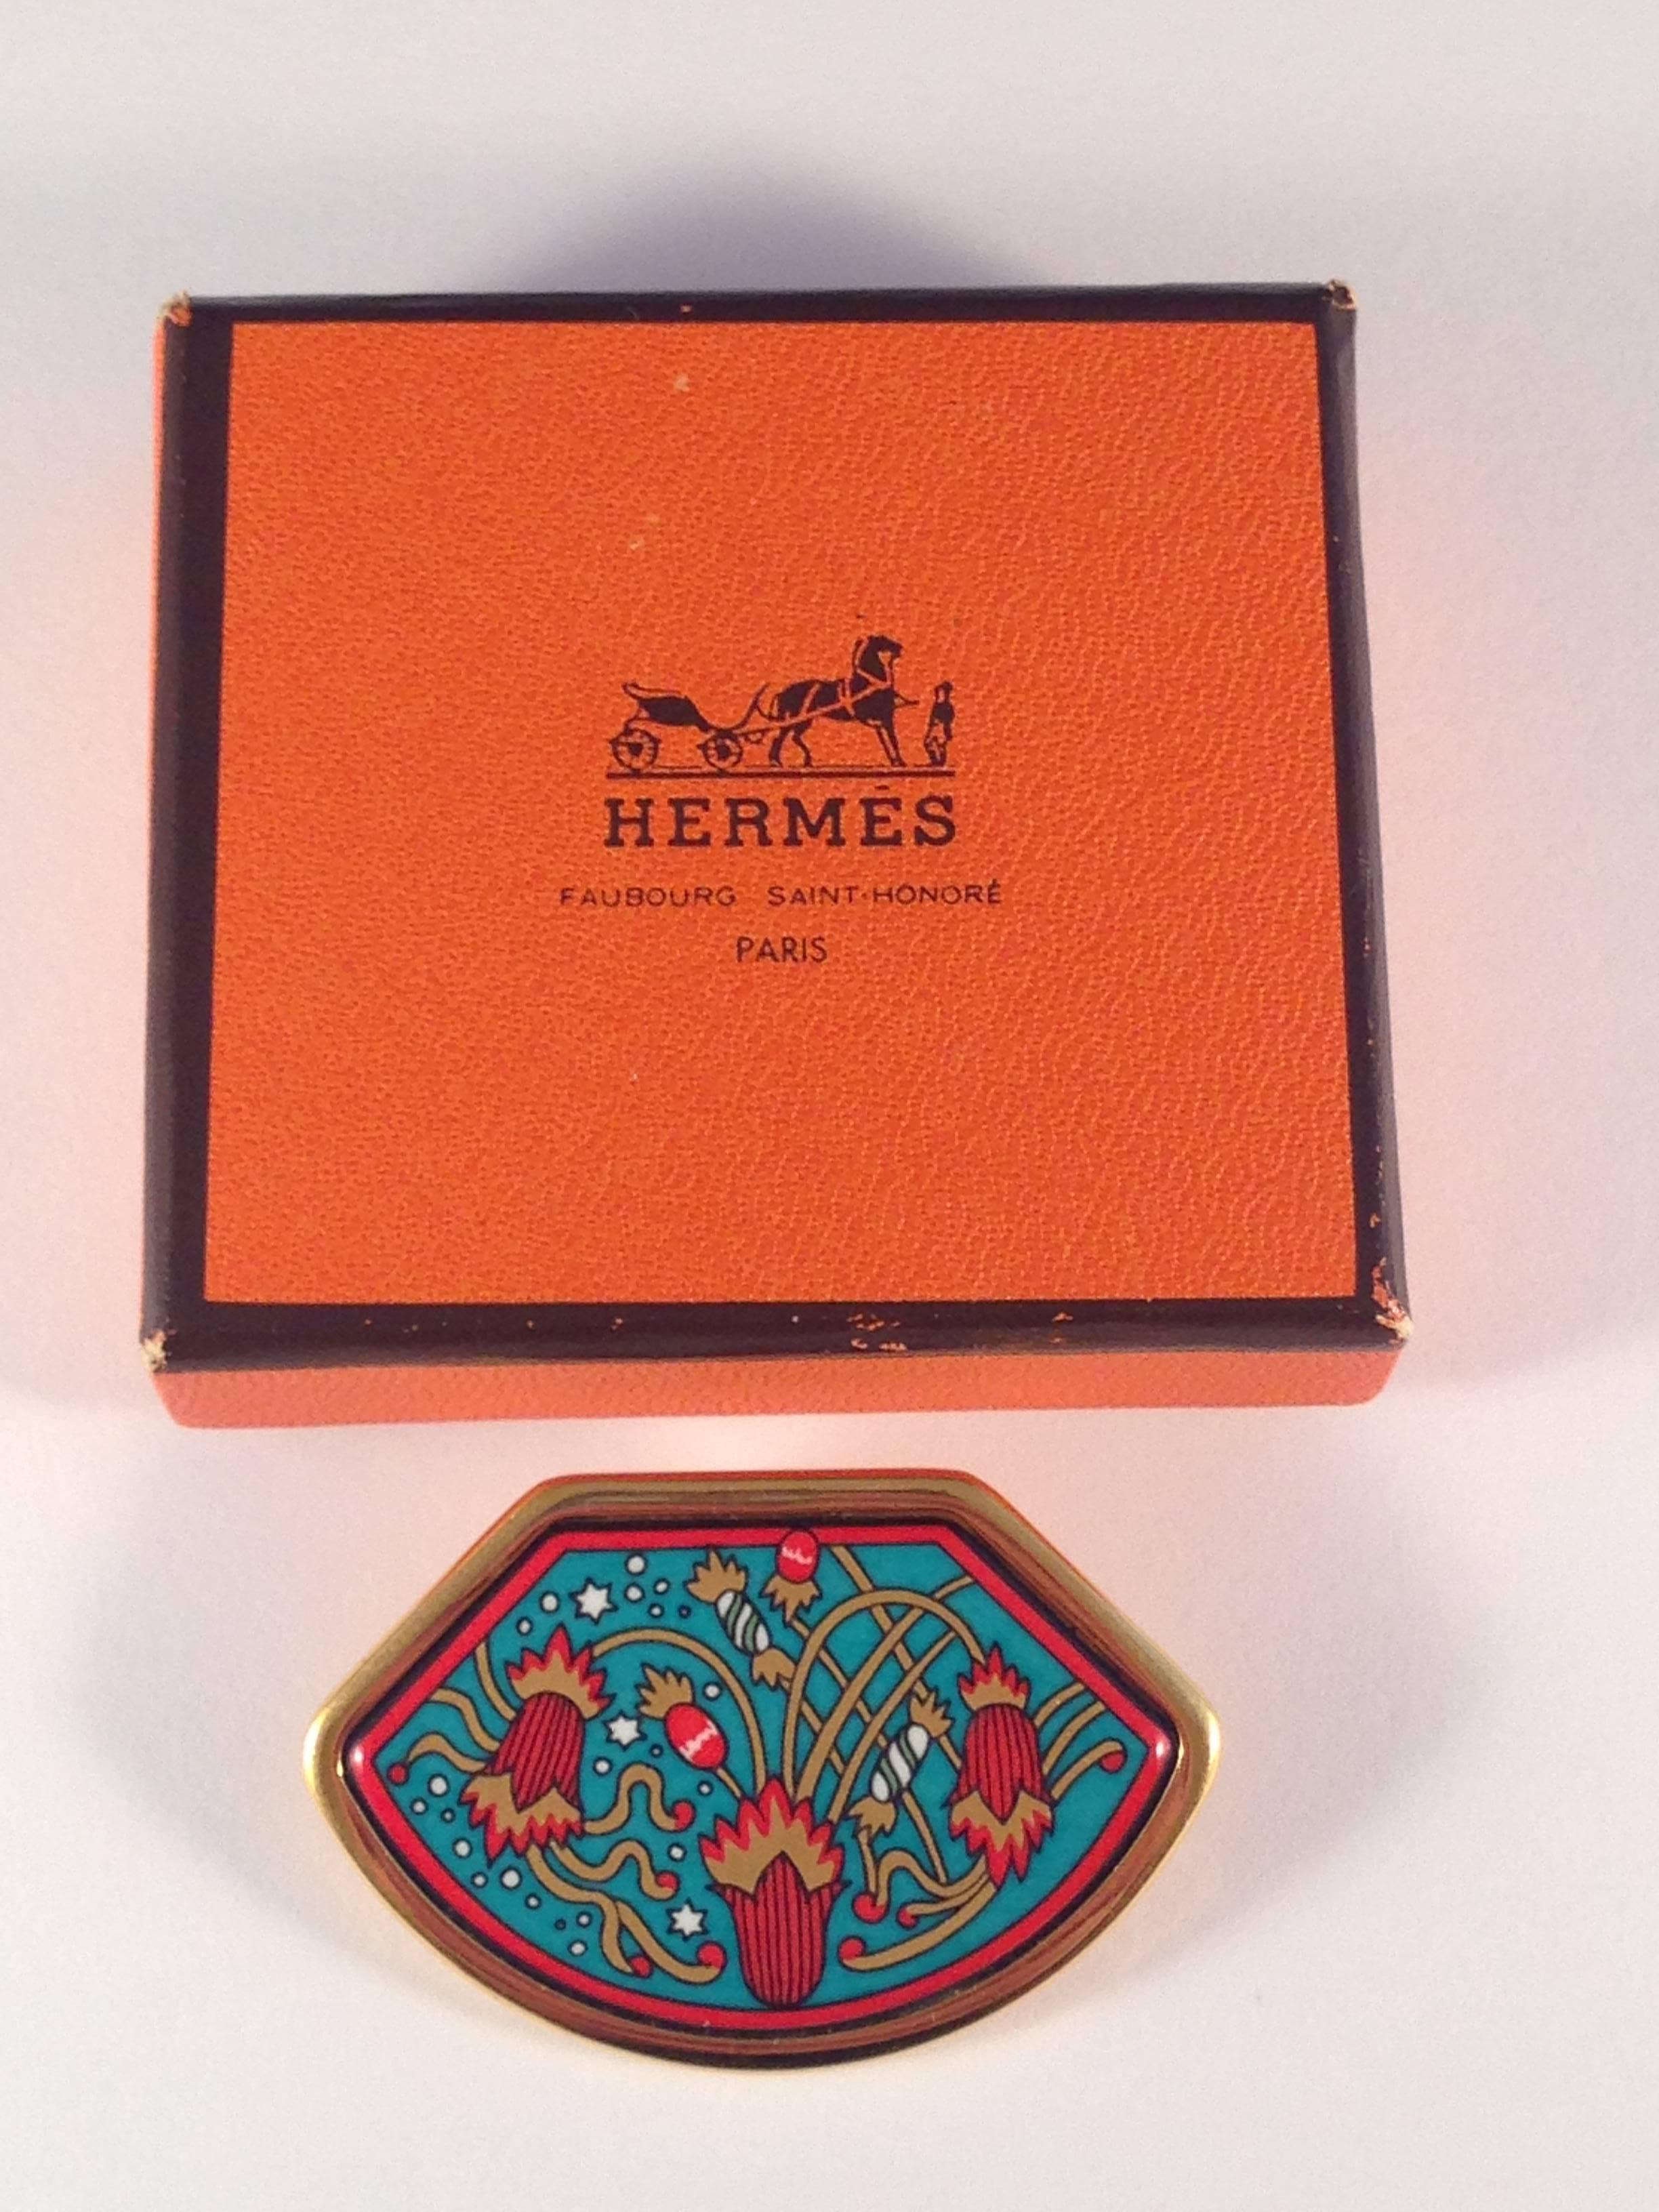 This is a 1990s Hermes gold-tone enamel brooch. Beautiful rich colors with an abstract floral pattern. It is in excellent condition. It is marked "Hermes Made in France" on the back and comes in its original box. It is 1 3/4" wide at